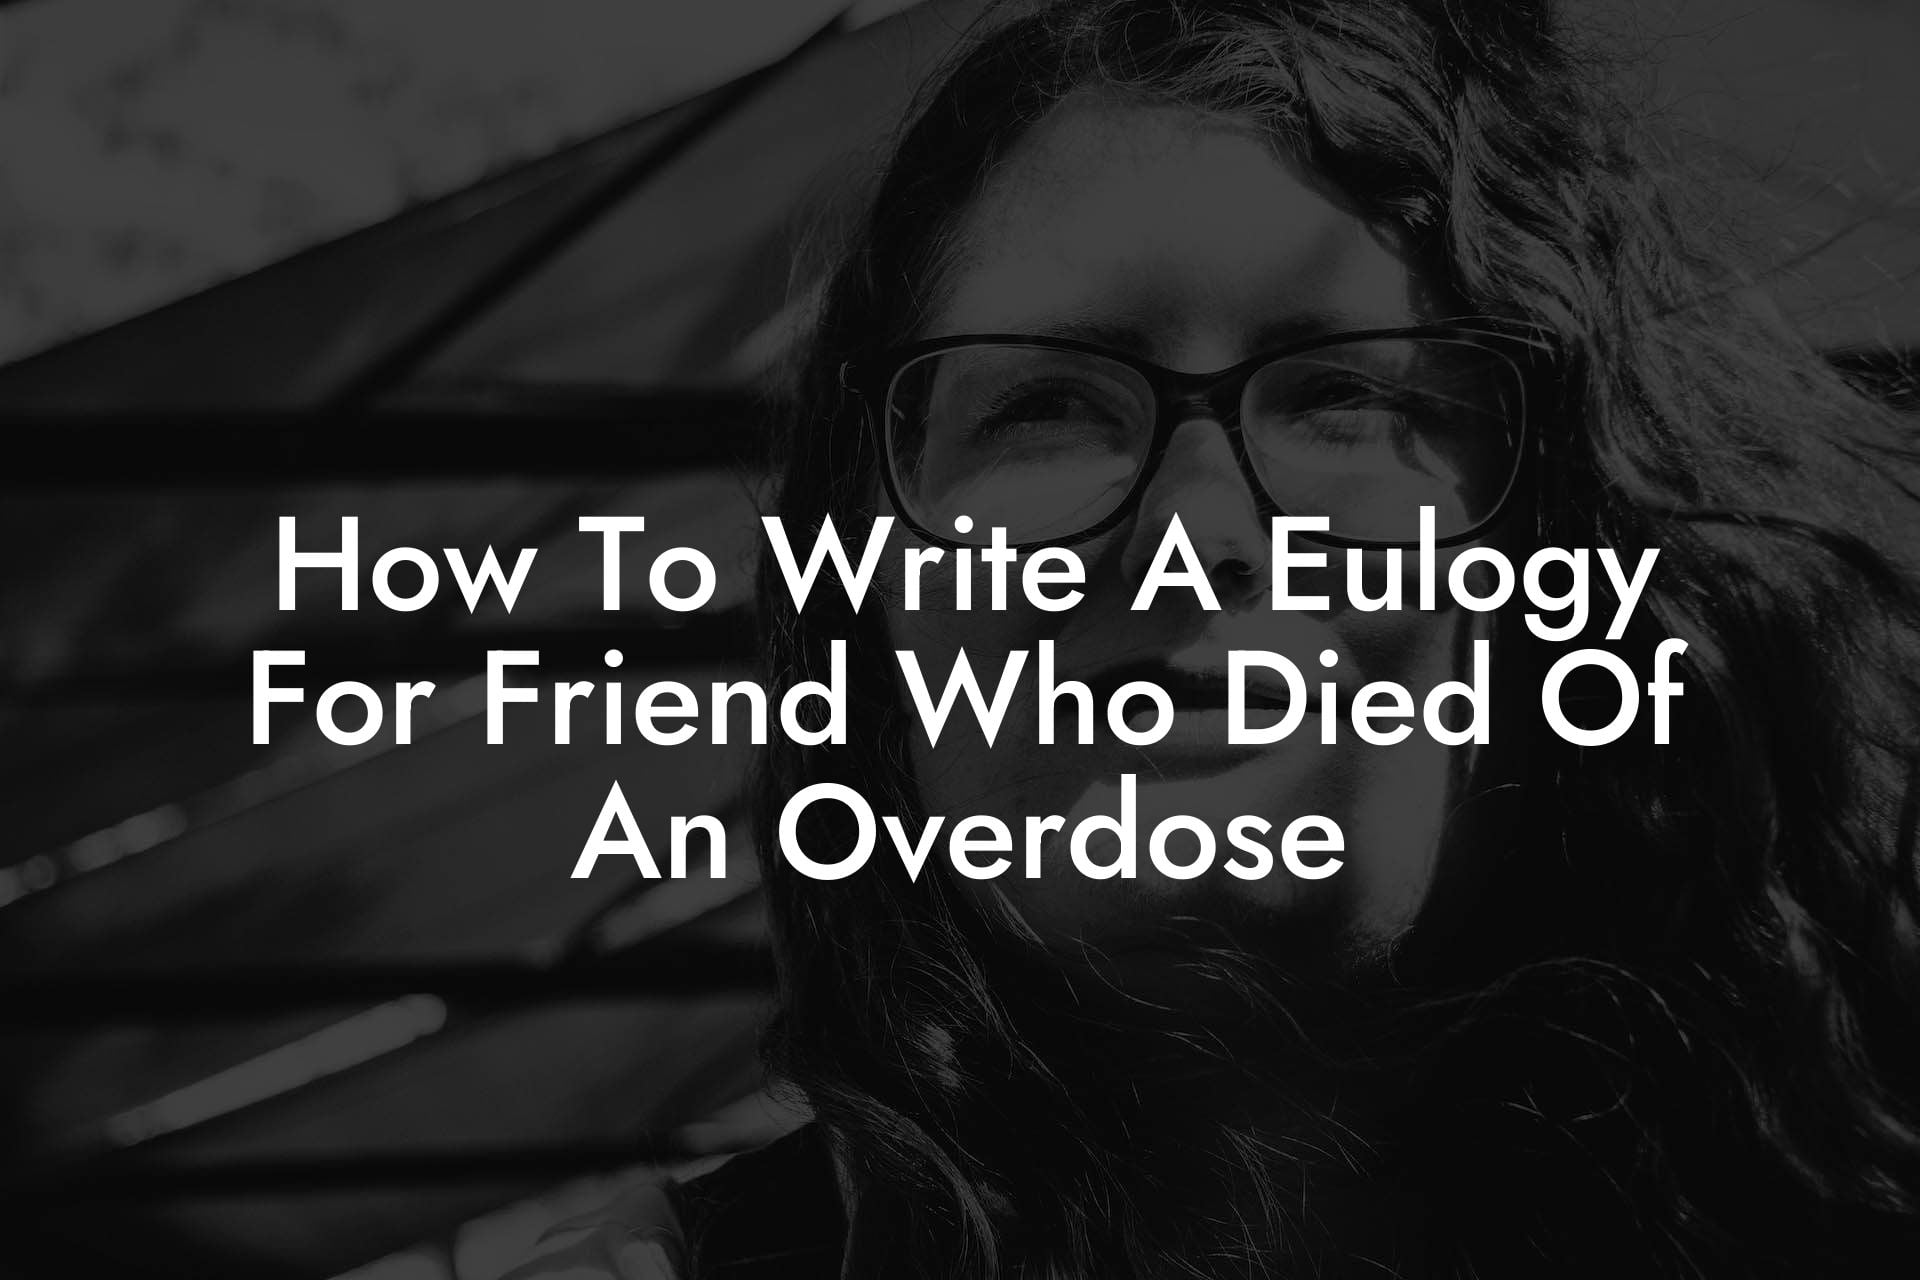 How To Write A Eulogy For Friend Who Died Of An Overdose